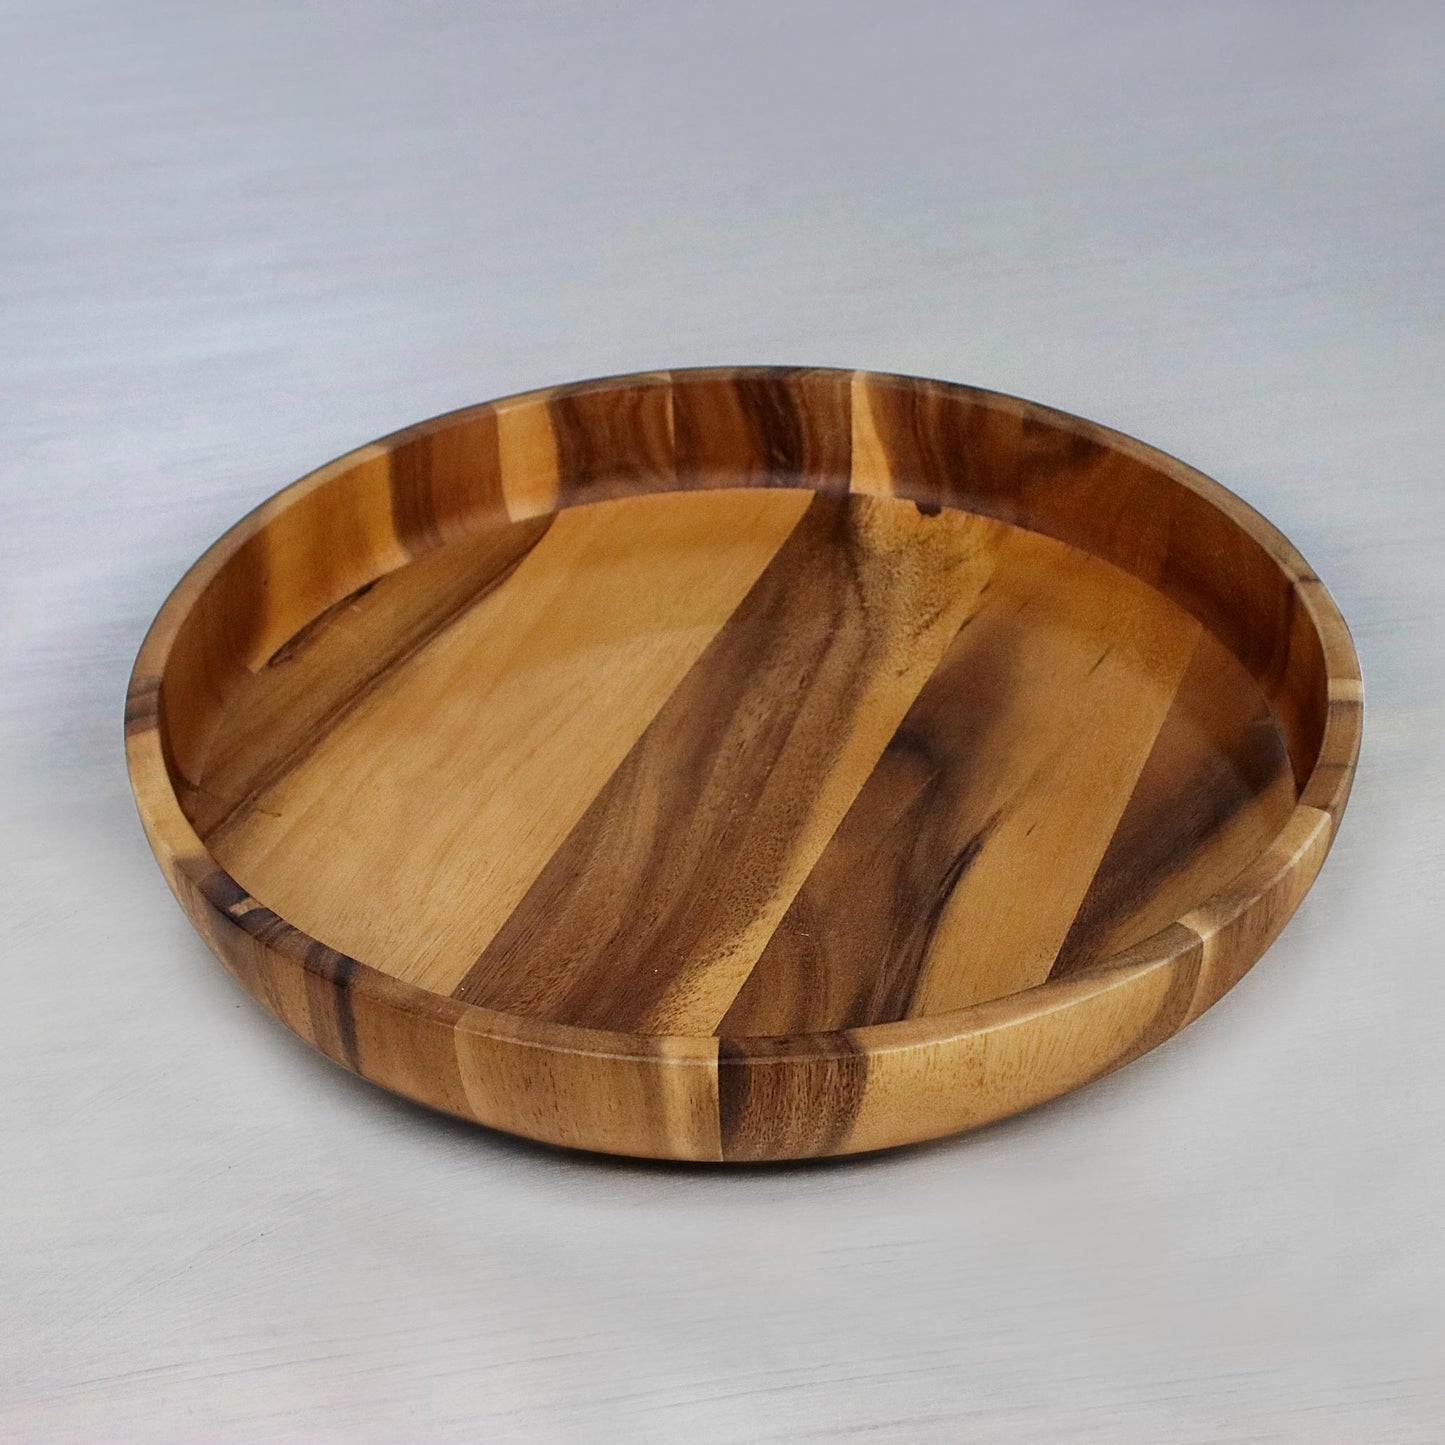 Harmonious Nature Artisan Crafted Natural Wood Serving Bowl from Thailand